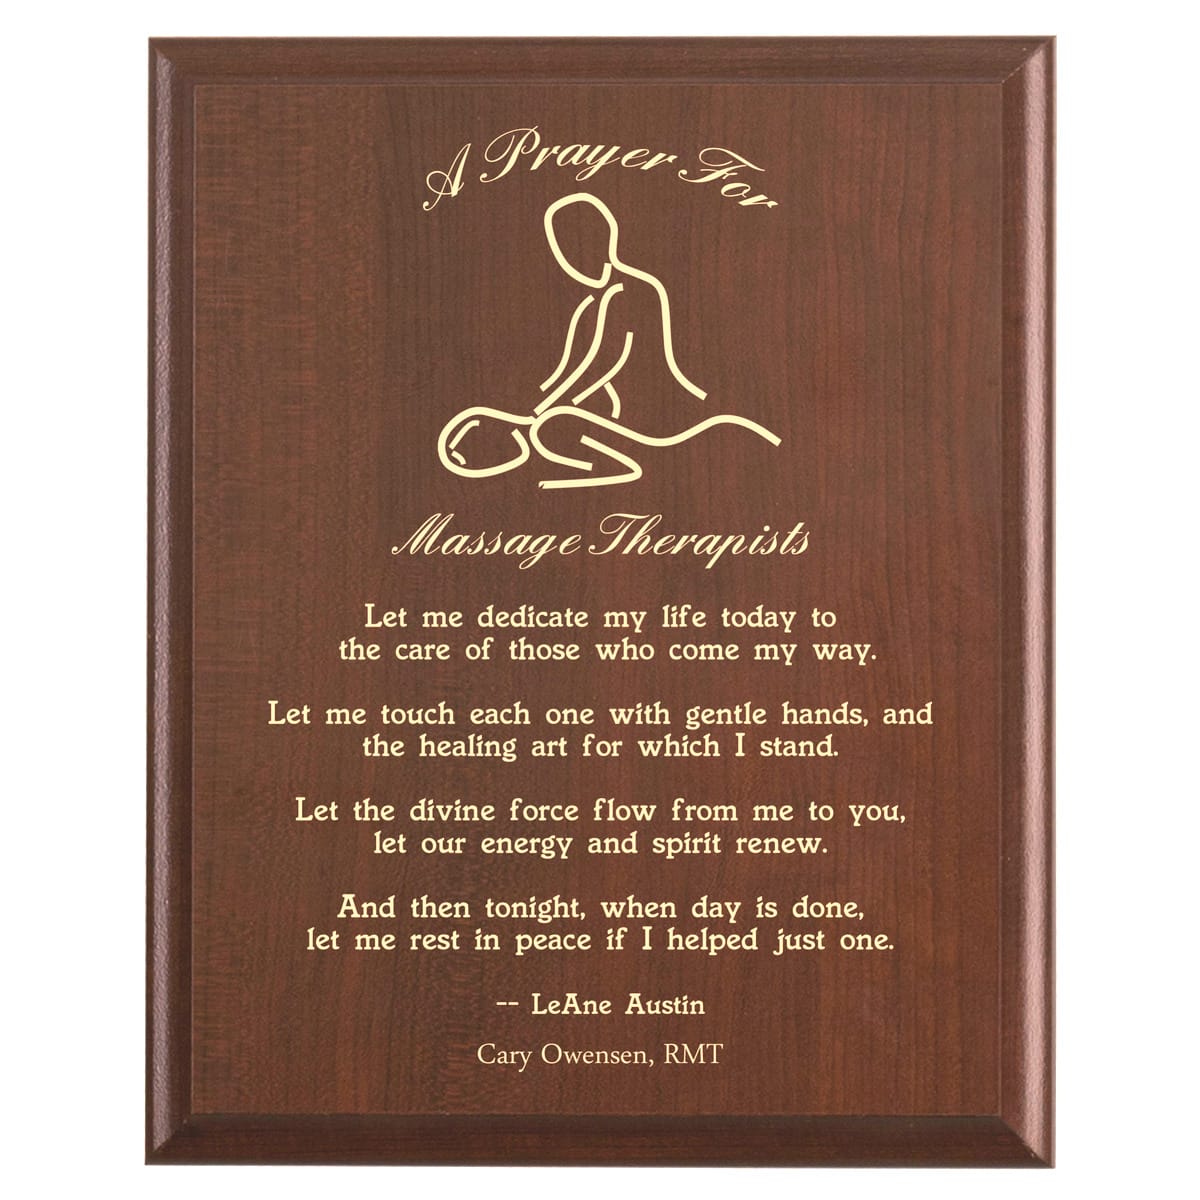 Plaque photo: Massage Therapist Prayer Plaque design with free personalization. Wood style finish with customized text.